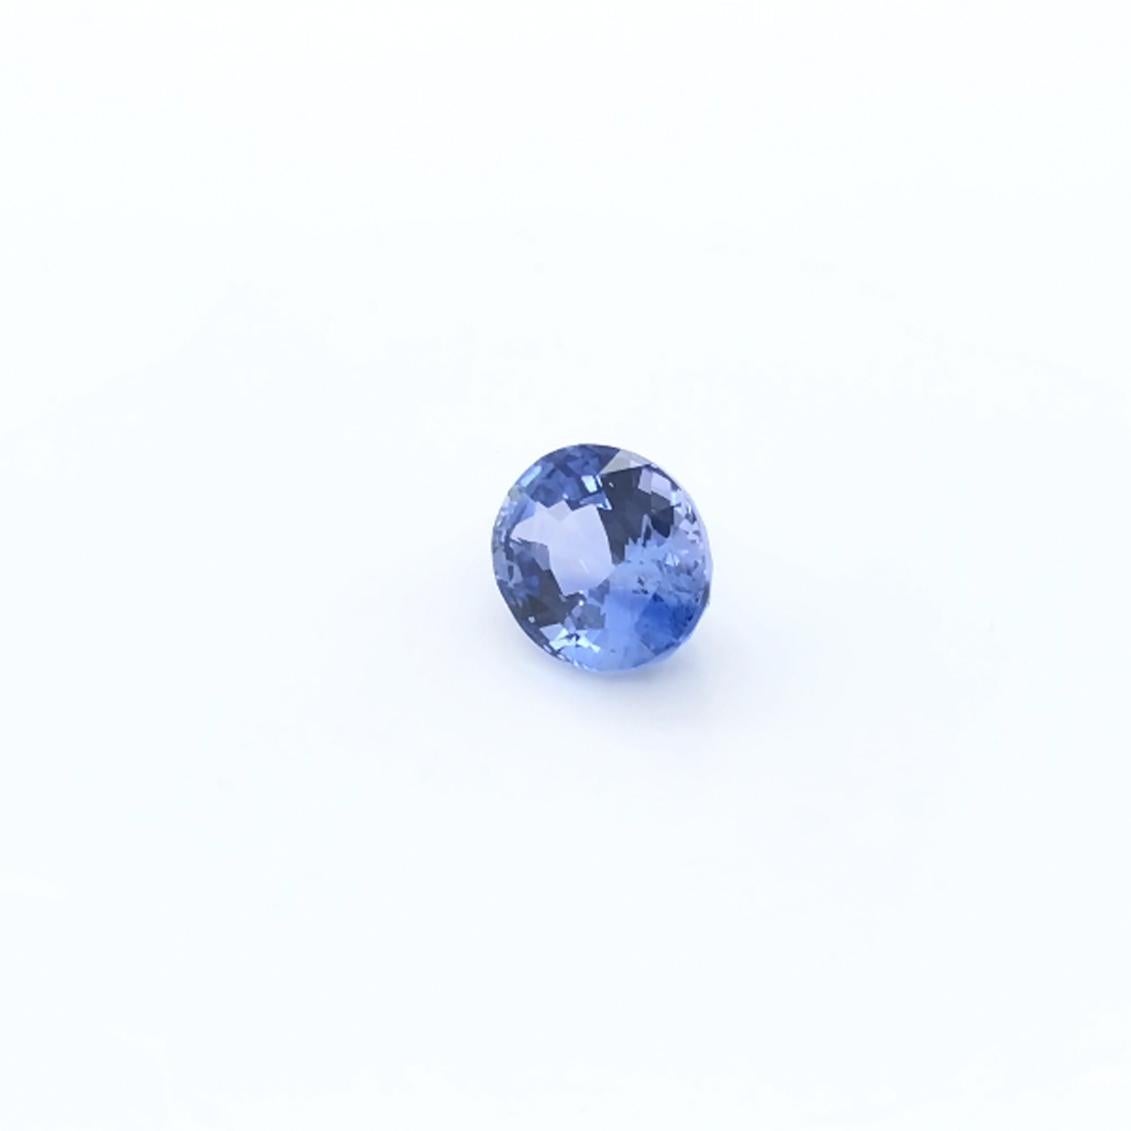 Oval Cut GIA and Bellerophon Certified 4.23ct Blue Sapphire Natural Gemstone For Sale